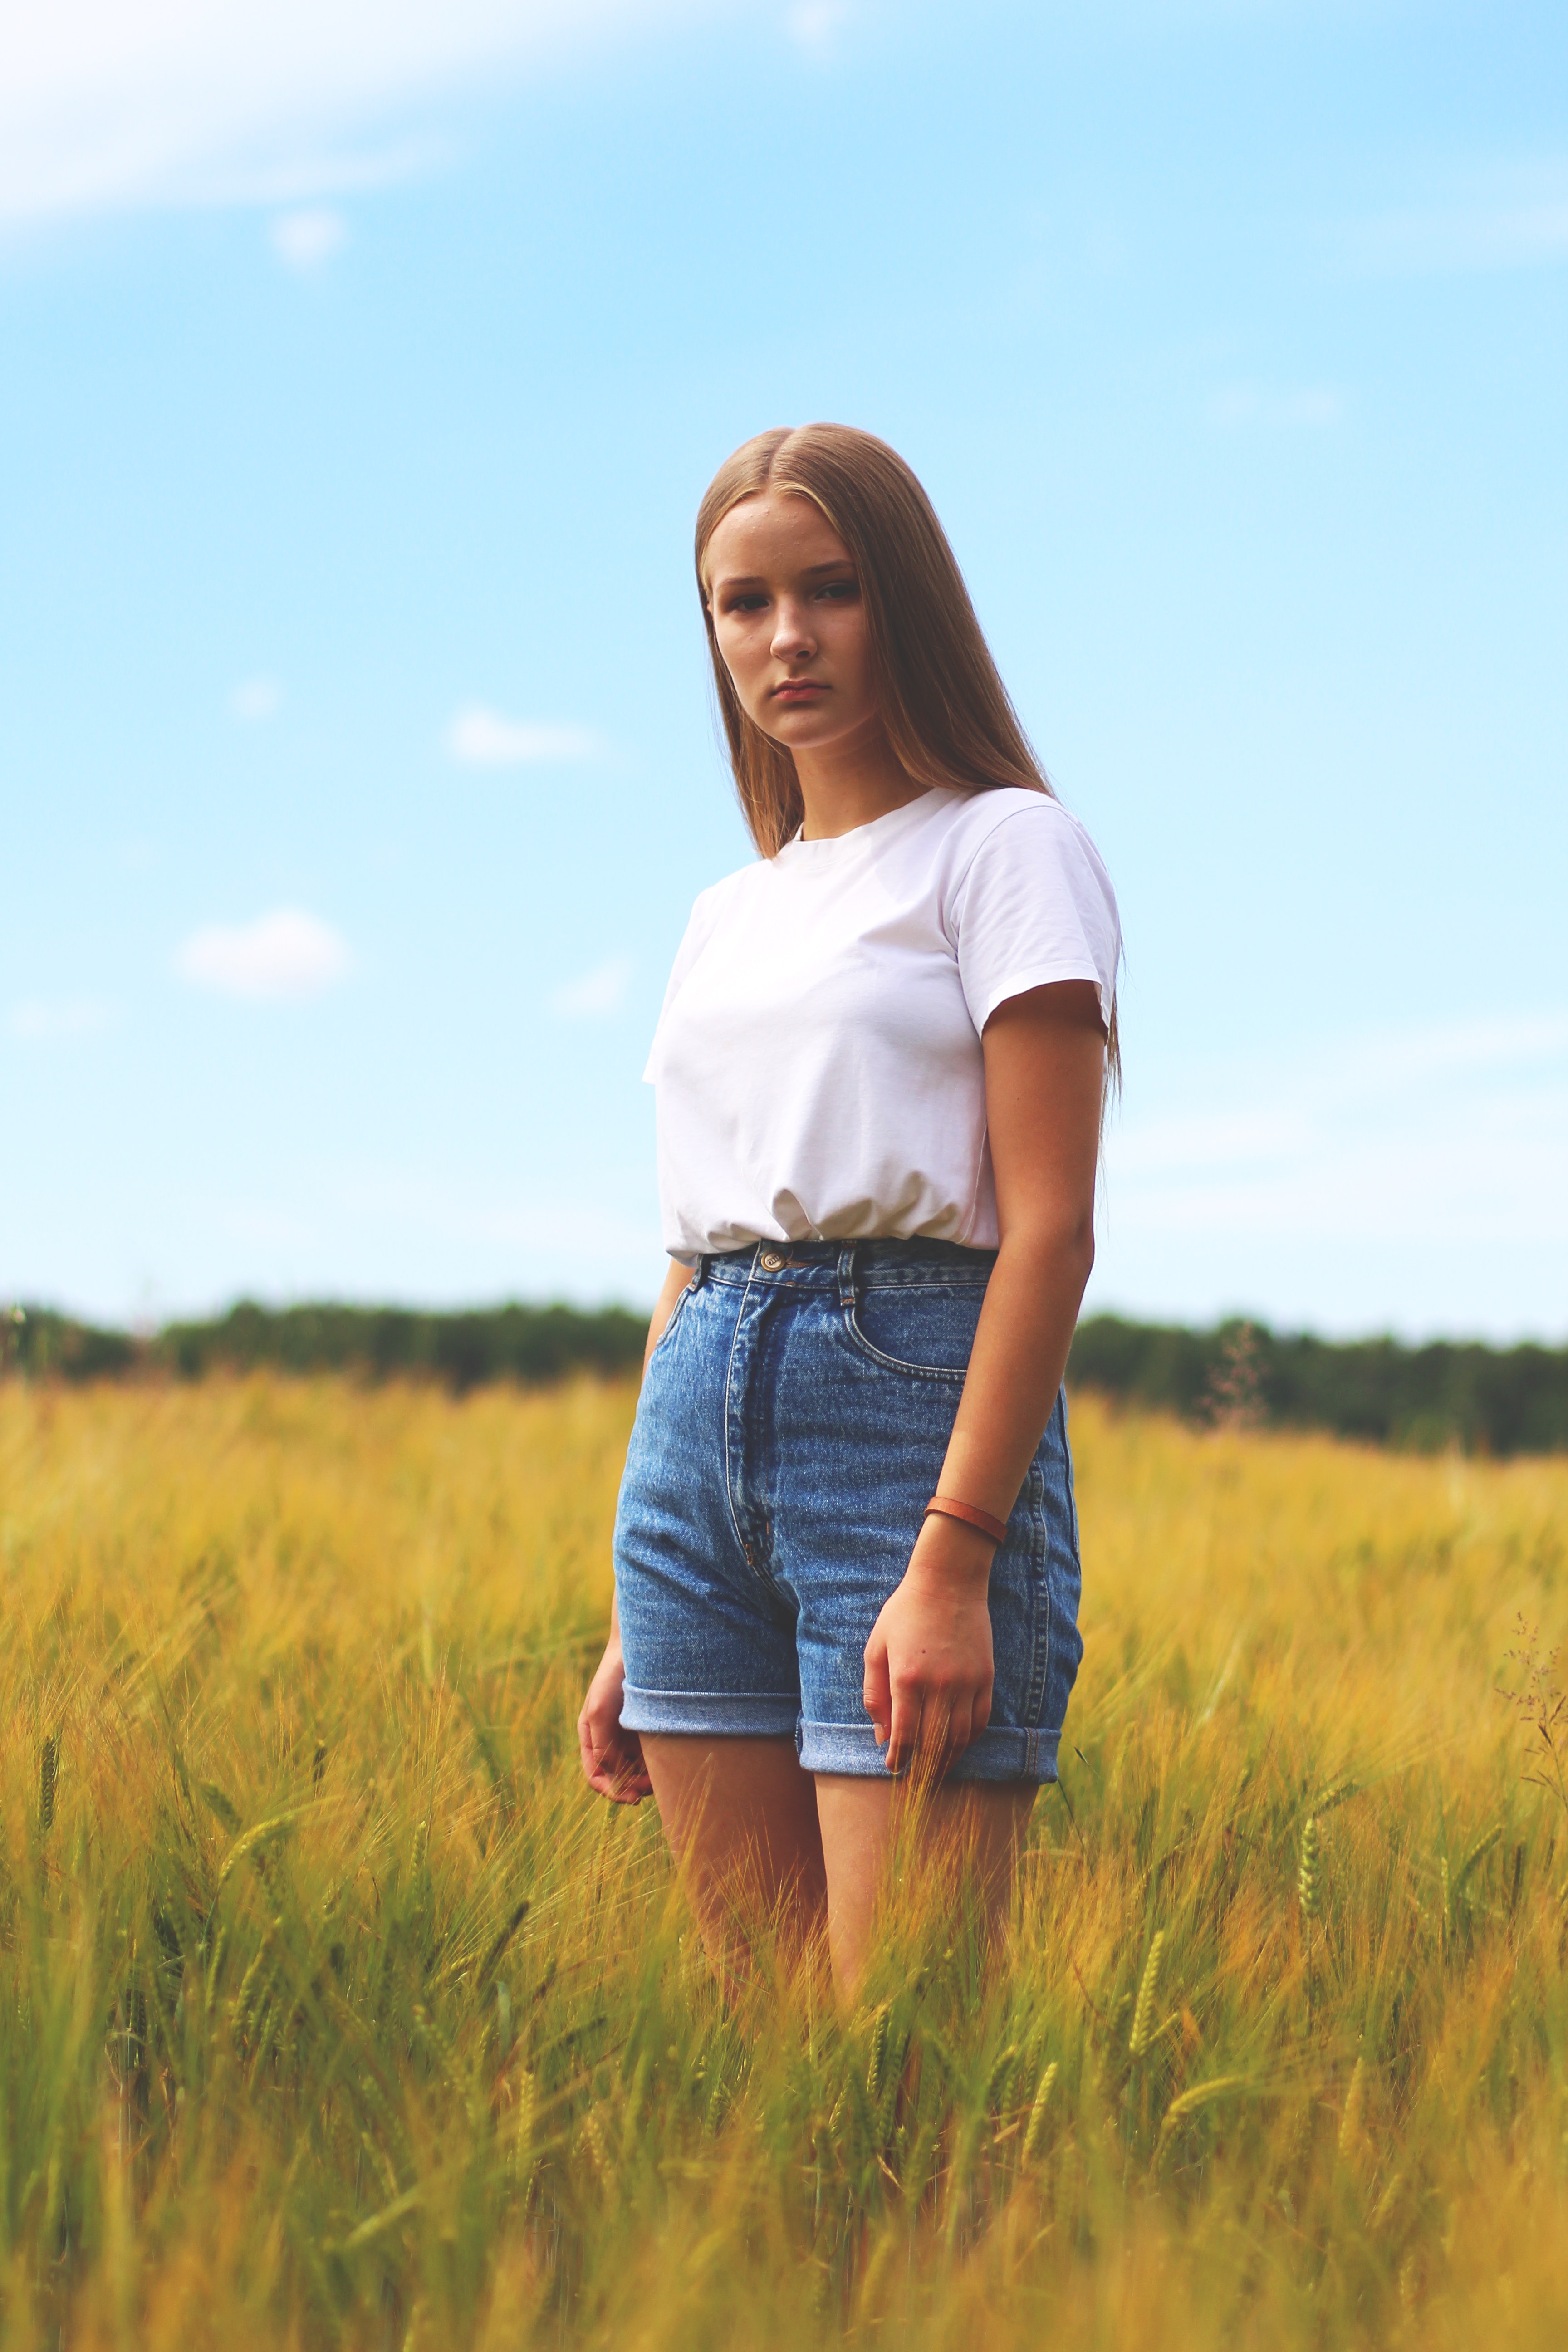 Woman Wearing White Crew-neck T-shirt, Blue Denim Cuff Short Shorts While Standing on Grass Field, Happy, Young, Woman, Trees, HQ Photo